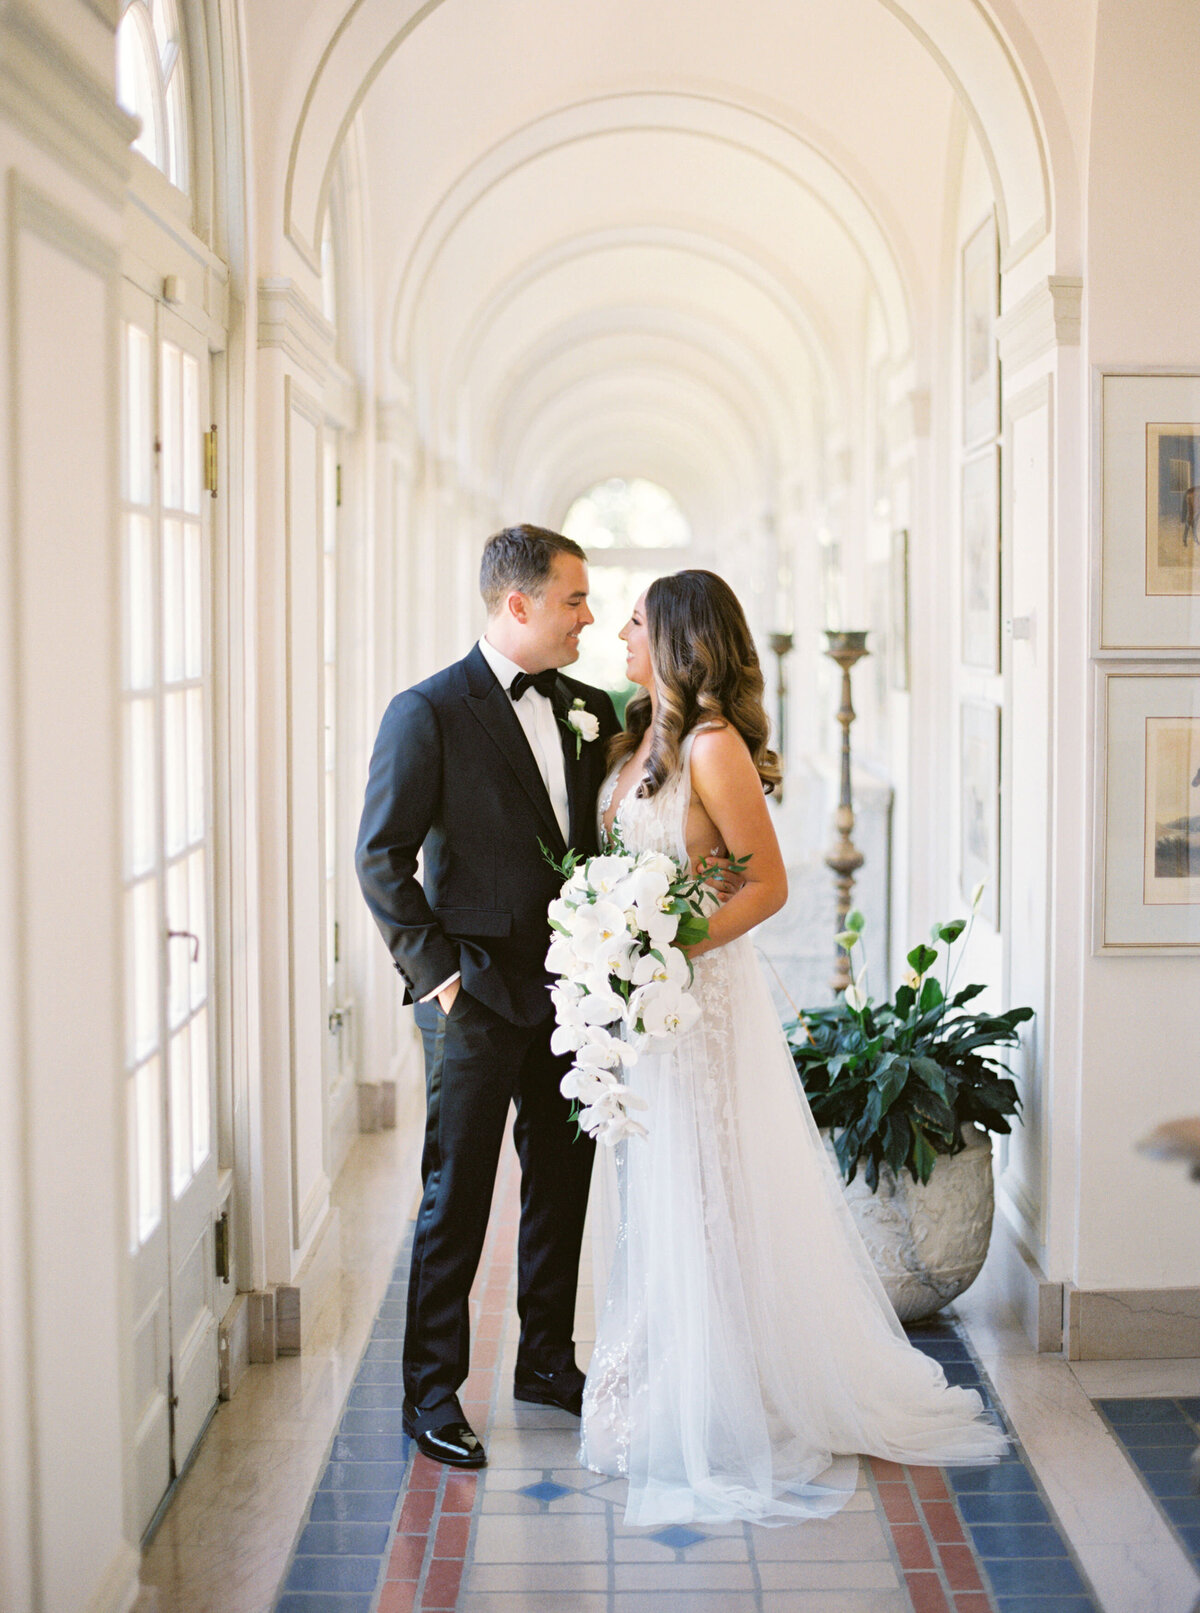 Bride and groom embrace in arched walkway